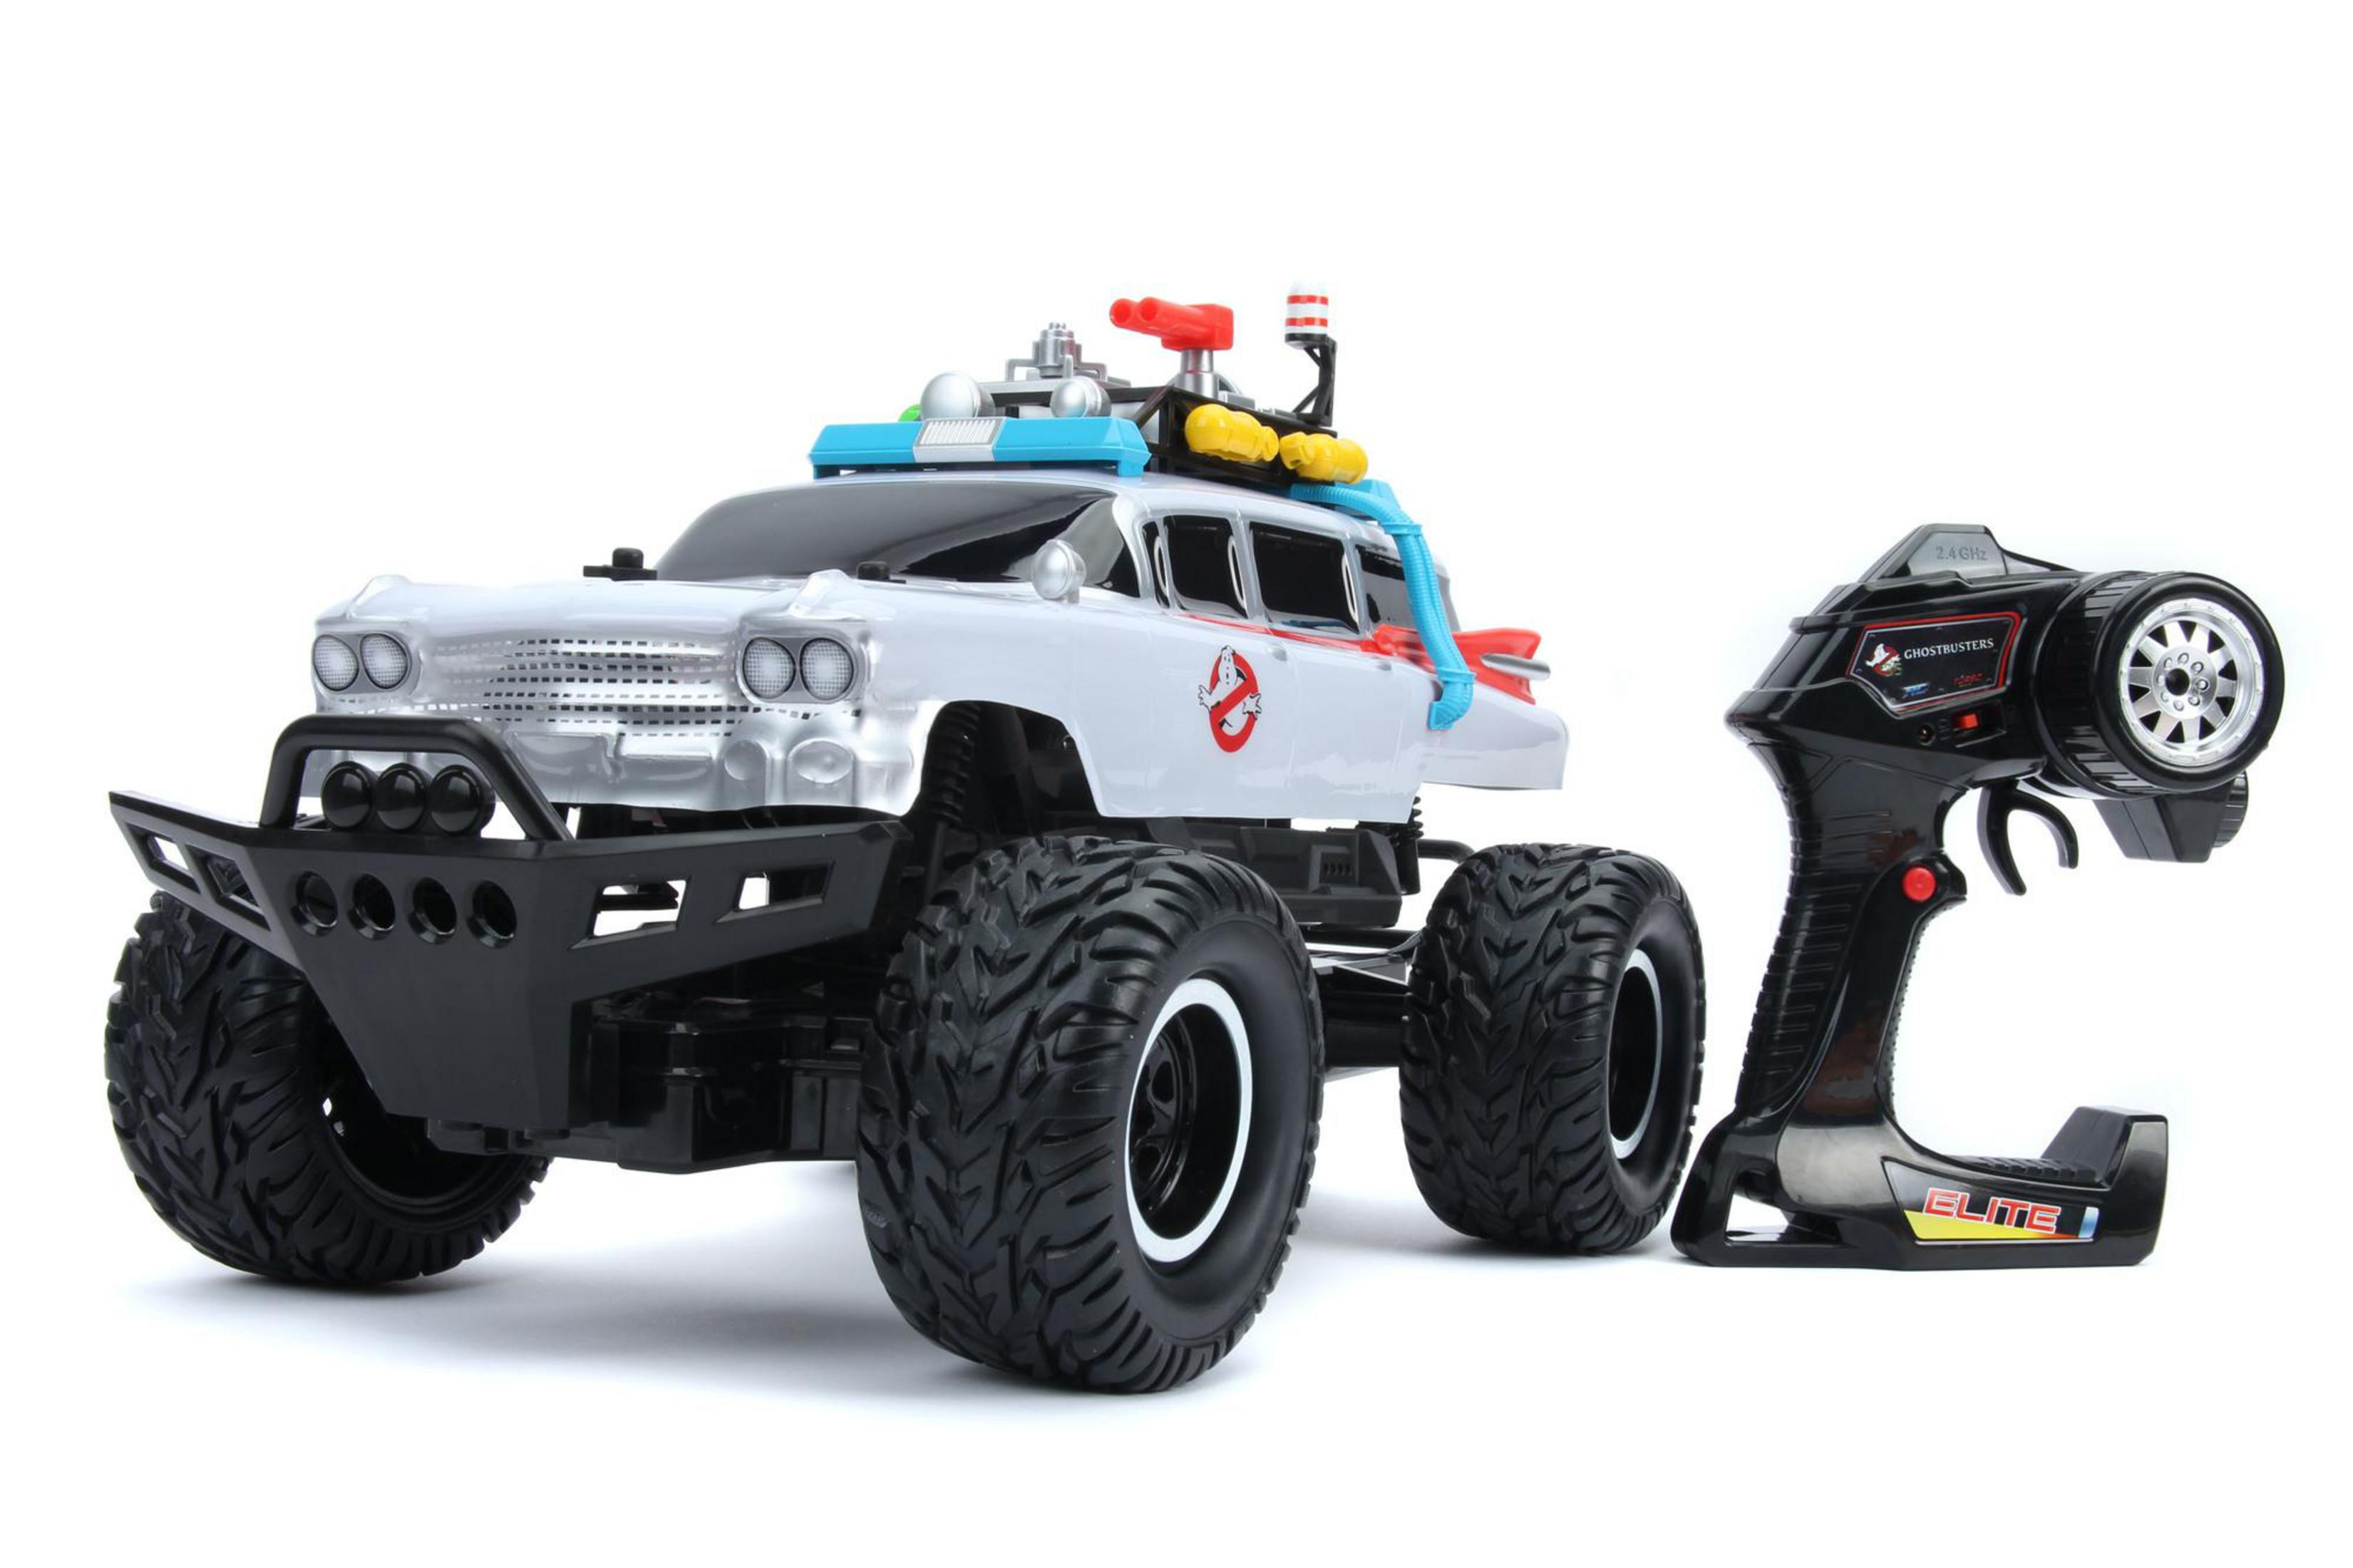 Mehrfarbig RC 253239000 OFFROAD DICKIE GHOSTBUSTERS Spielzeugauto, TOYS R/C